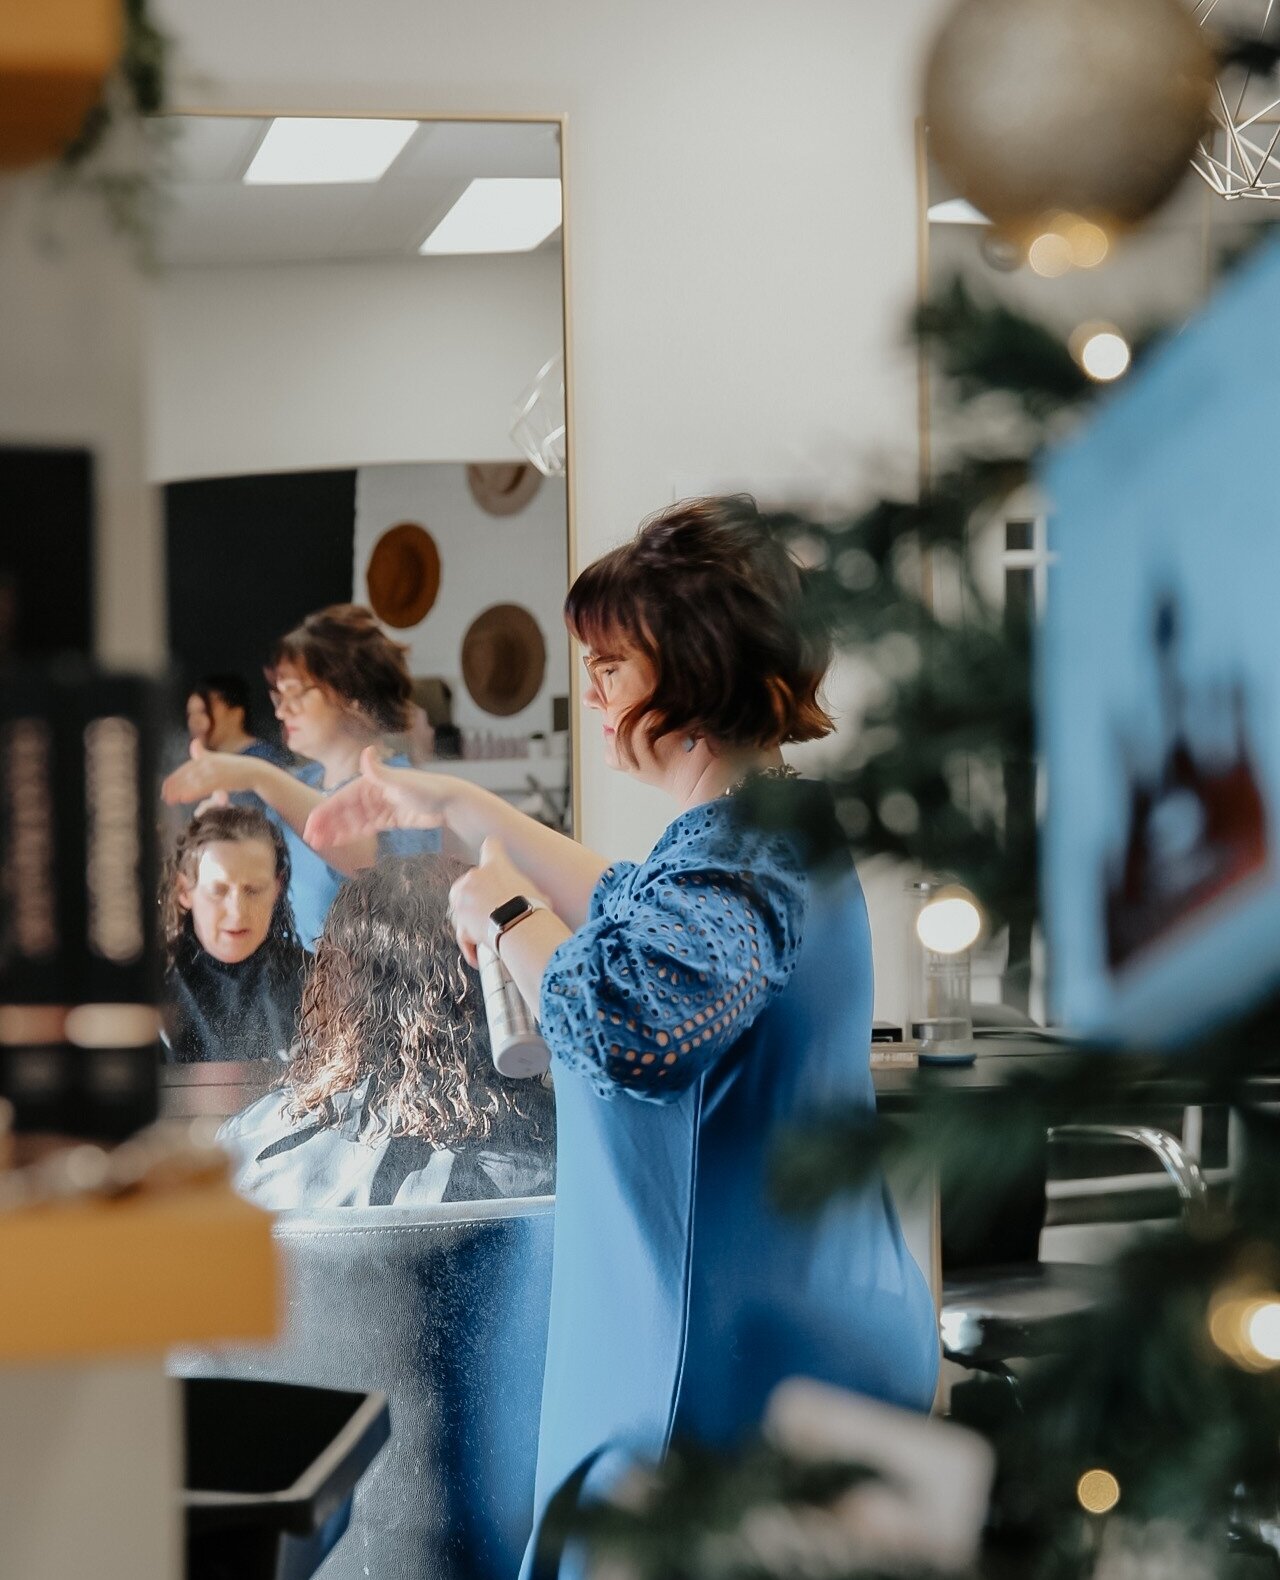 Here's your friendly reminder to book your holiday hair appointment sooner than later! We are all booking up fast! Call the shop today or book online. ⁠
⁠
⁠
⁠
⁠
⁠
⁠
⁠
⁠
manitoba salon / holiday hairstyle / hair color / hair salon / salon and spa / ma